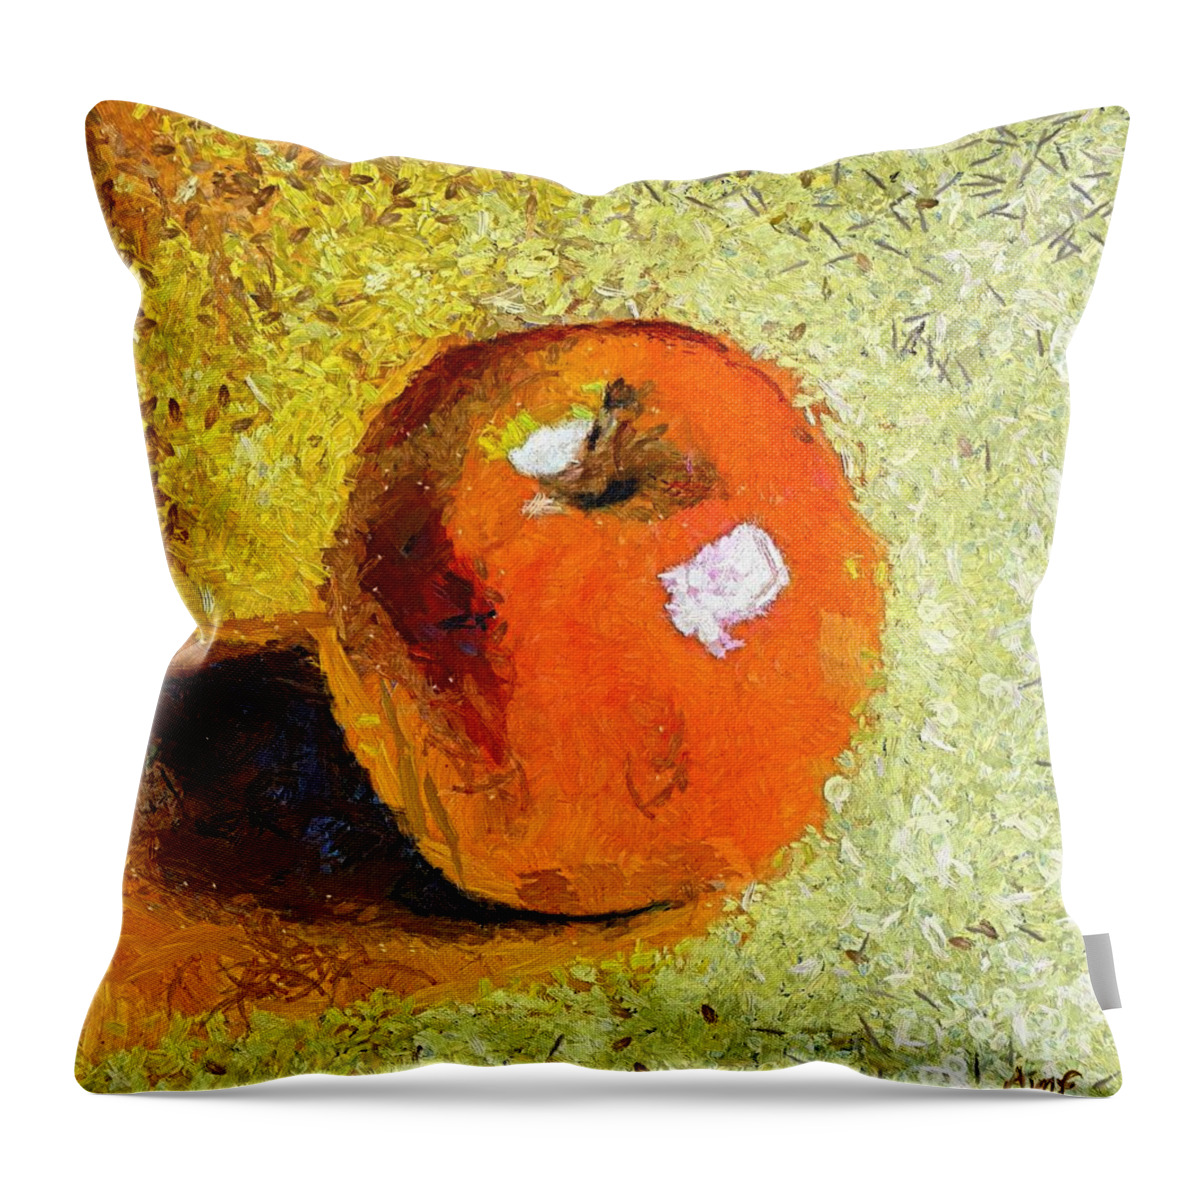 Red Apple Throw Pillow featuring the painting Red Apple by Dragica Micki Fortuna